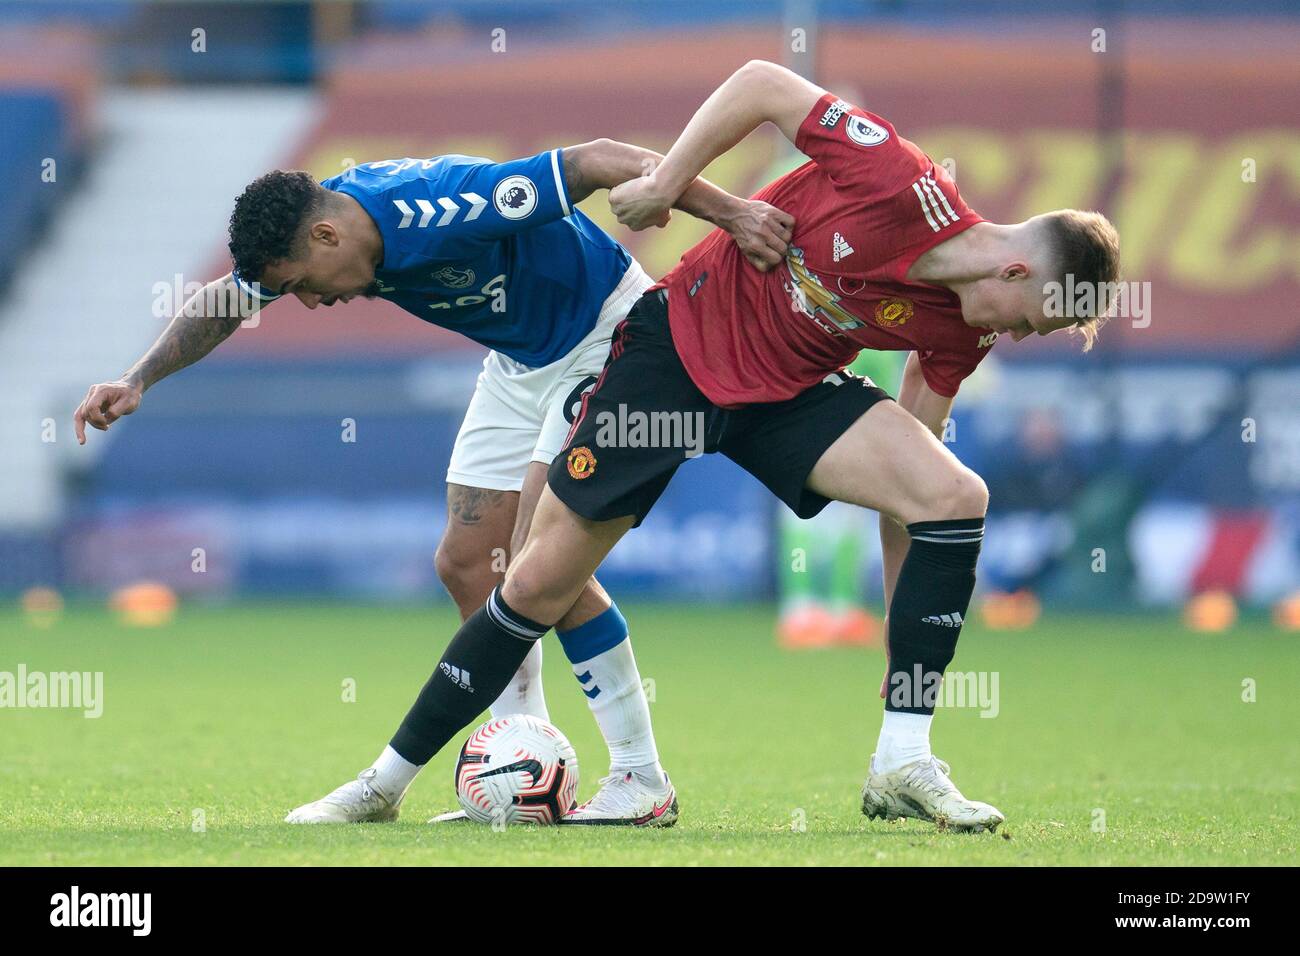 Liverpool. 8th Nov, 2020. Manchester United's Scott McTominay (R) vies with Everton's Allan during the Premier League match between Everton and Manchester United at Goodison Park Stadium in Liverpool, Britain, on Nov. 7, 2020. Manchester United won 3-1. Credit: Xinhua/Alamy Live News Stock Photo